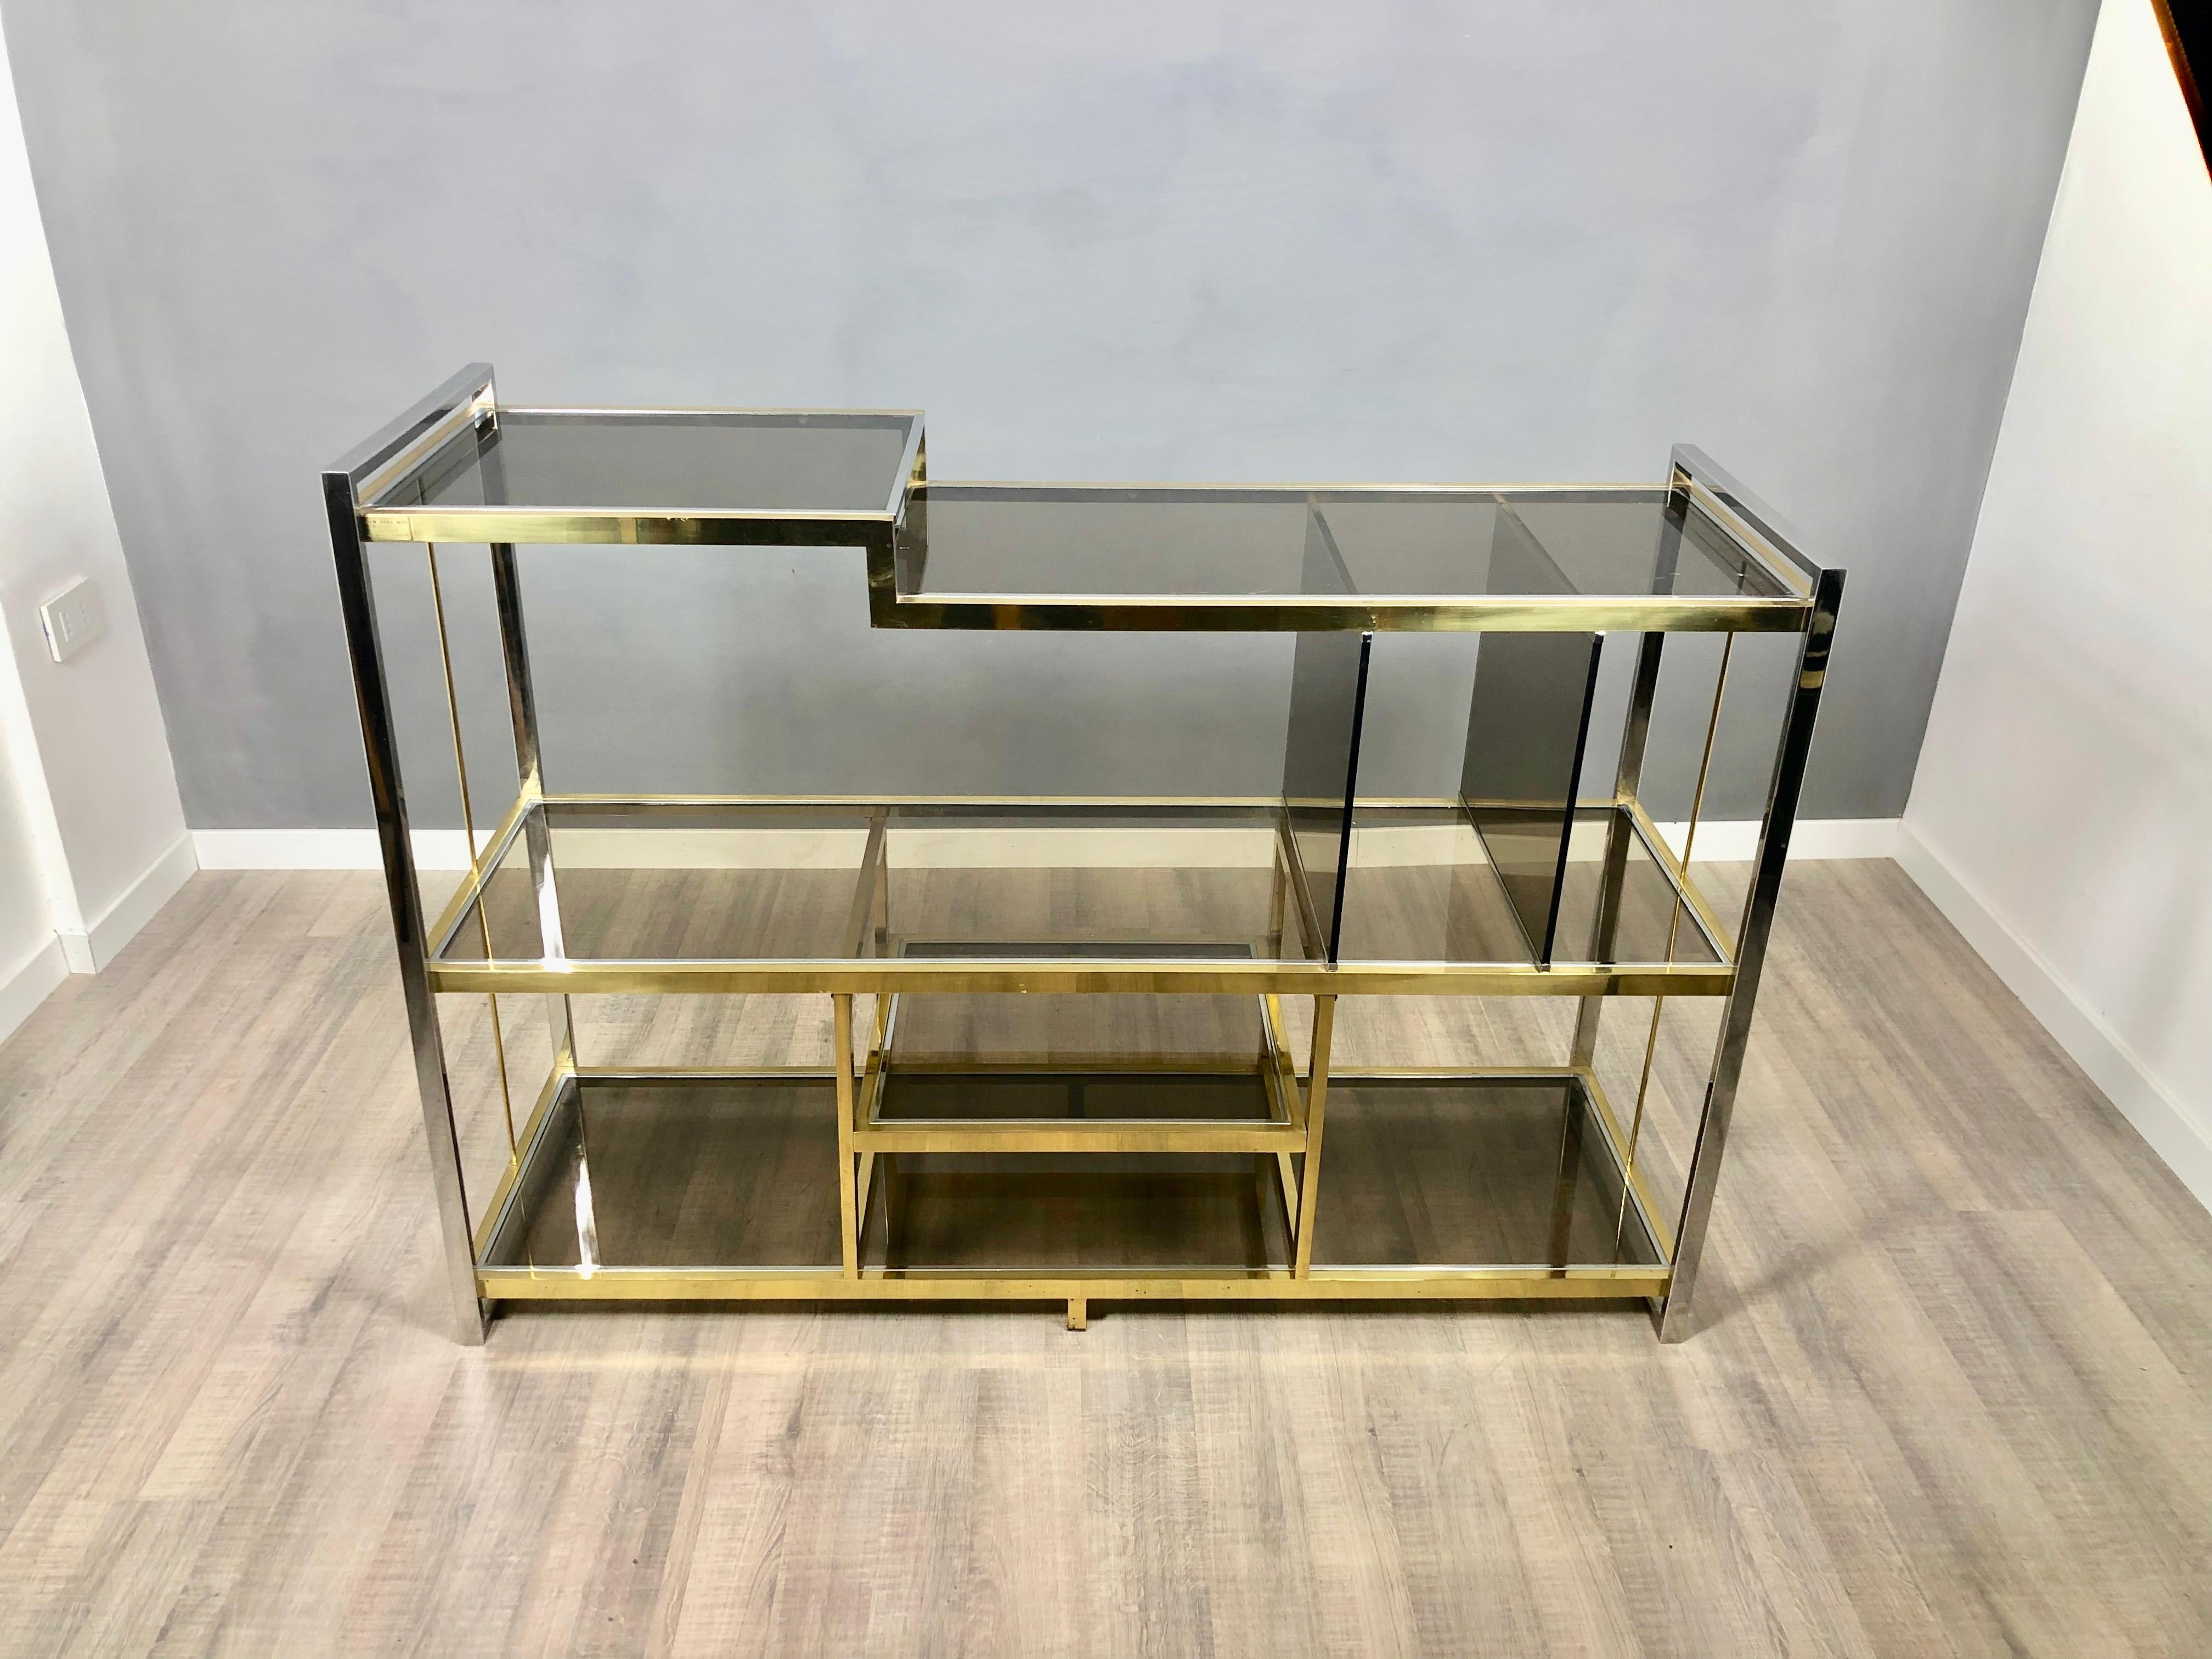 Console / sideboard in brass, chrome and smoked glass. Designed by the Italian Serantoni & Arcangeli for New Ideas Inox, circa 1970s, Italy.
It has its original target.
Condition are excellent, light wear due to age and use, as the photos